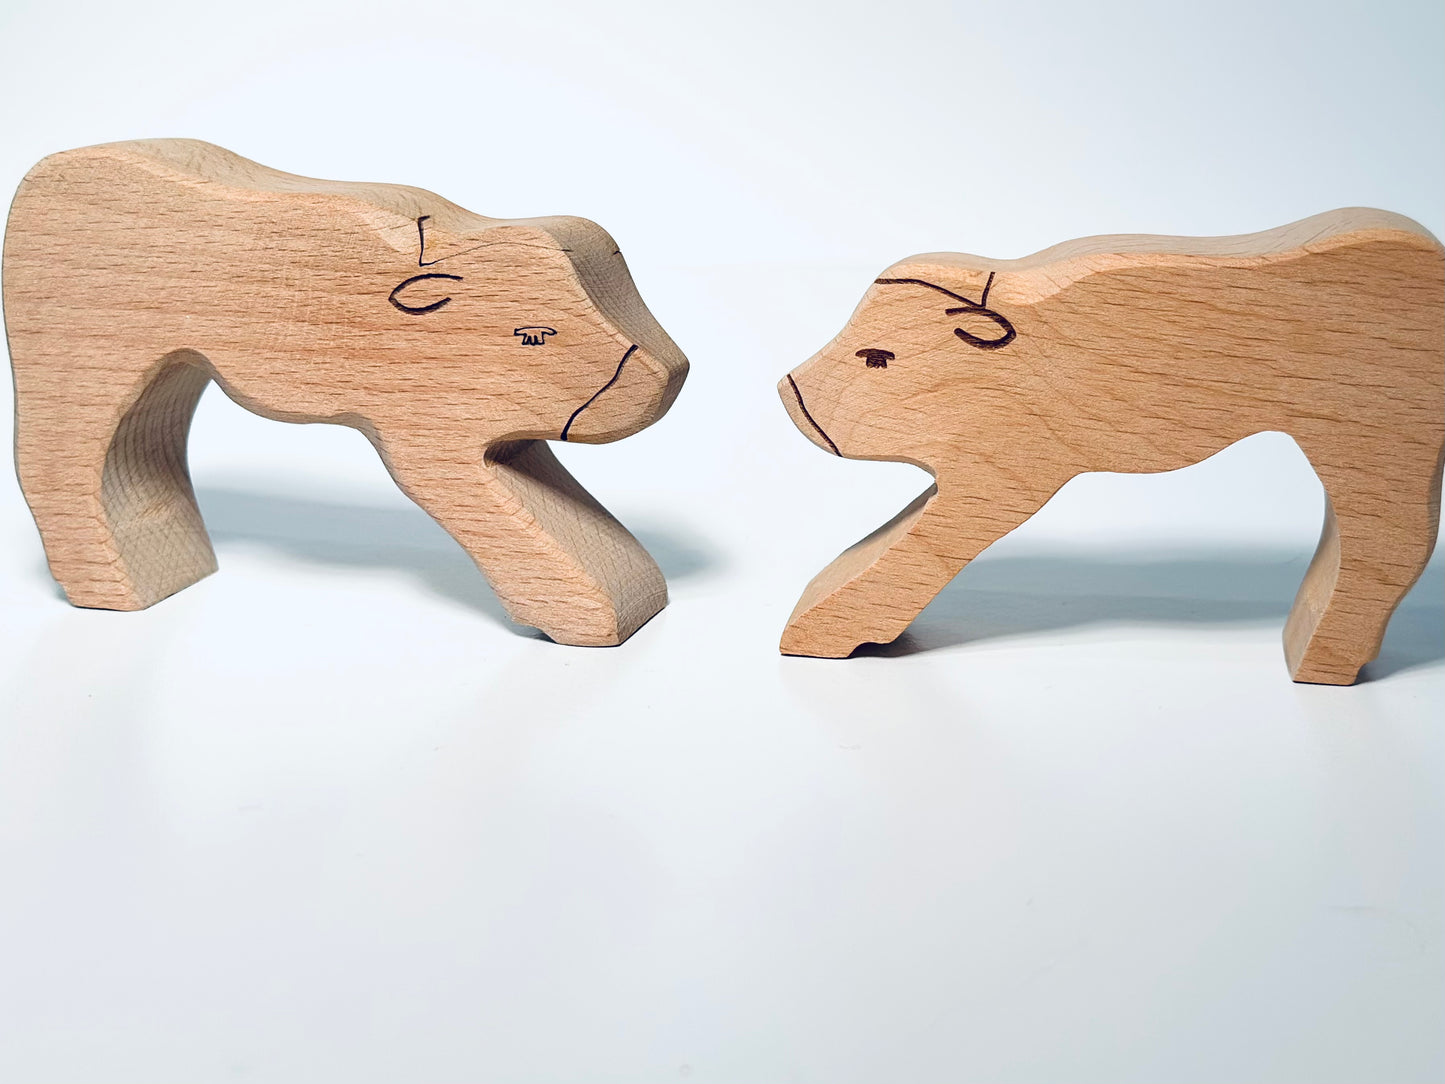 Wooden Animals - Bull, Cow or Calf